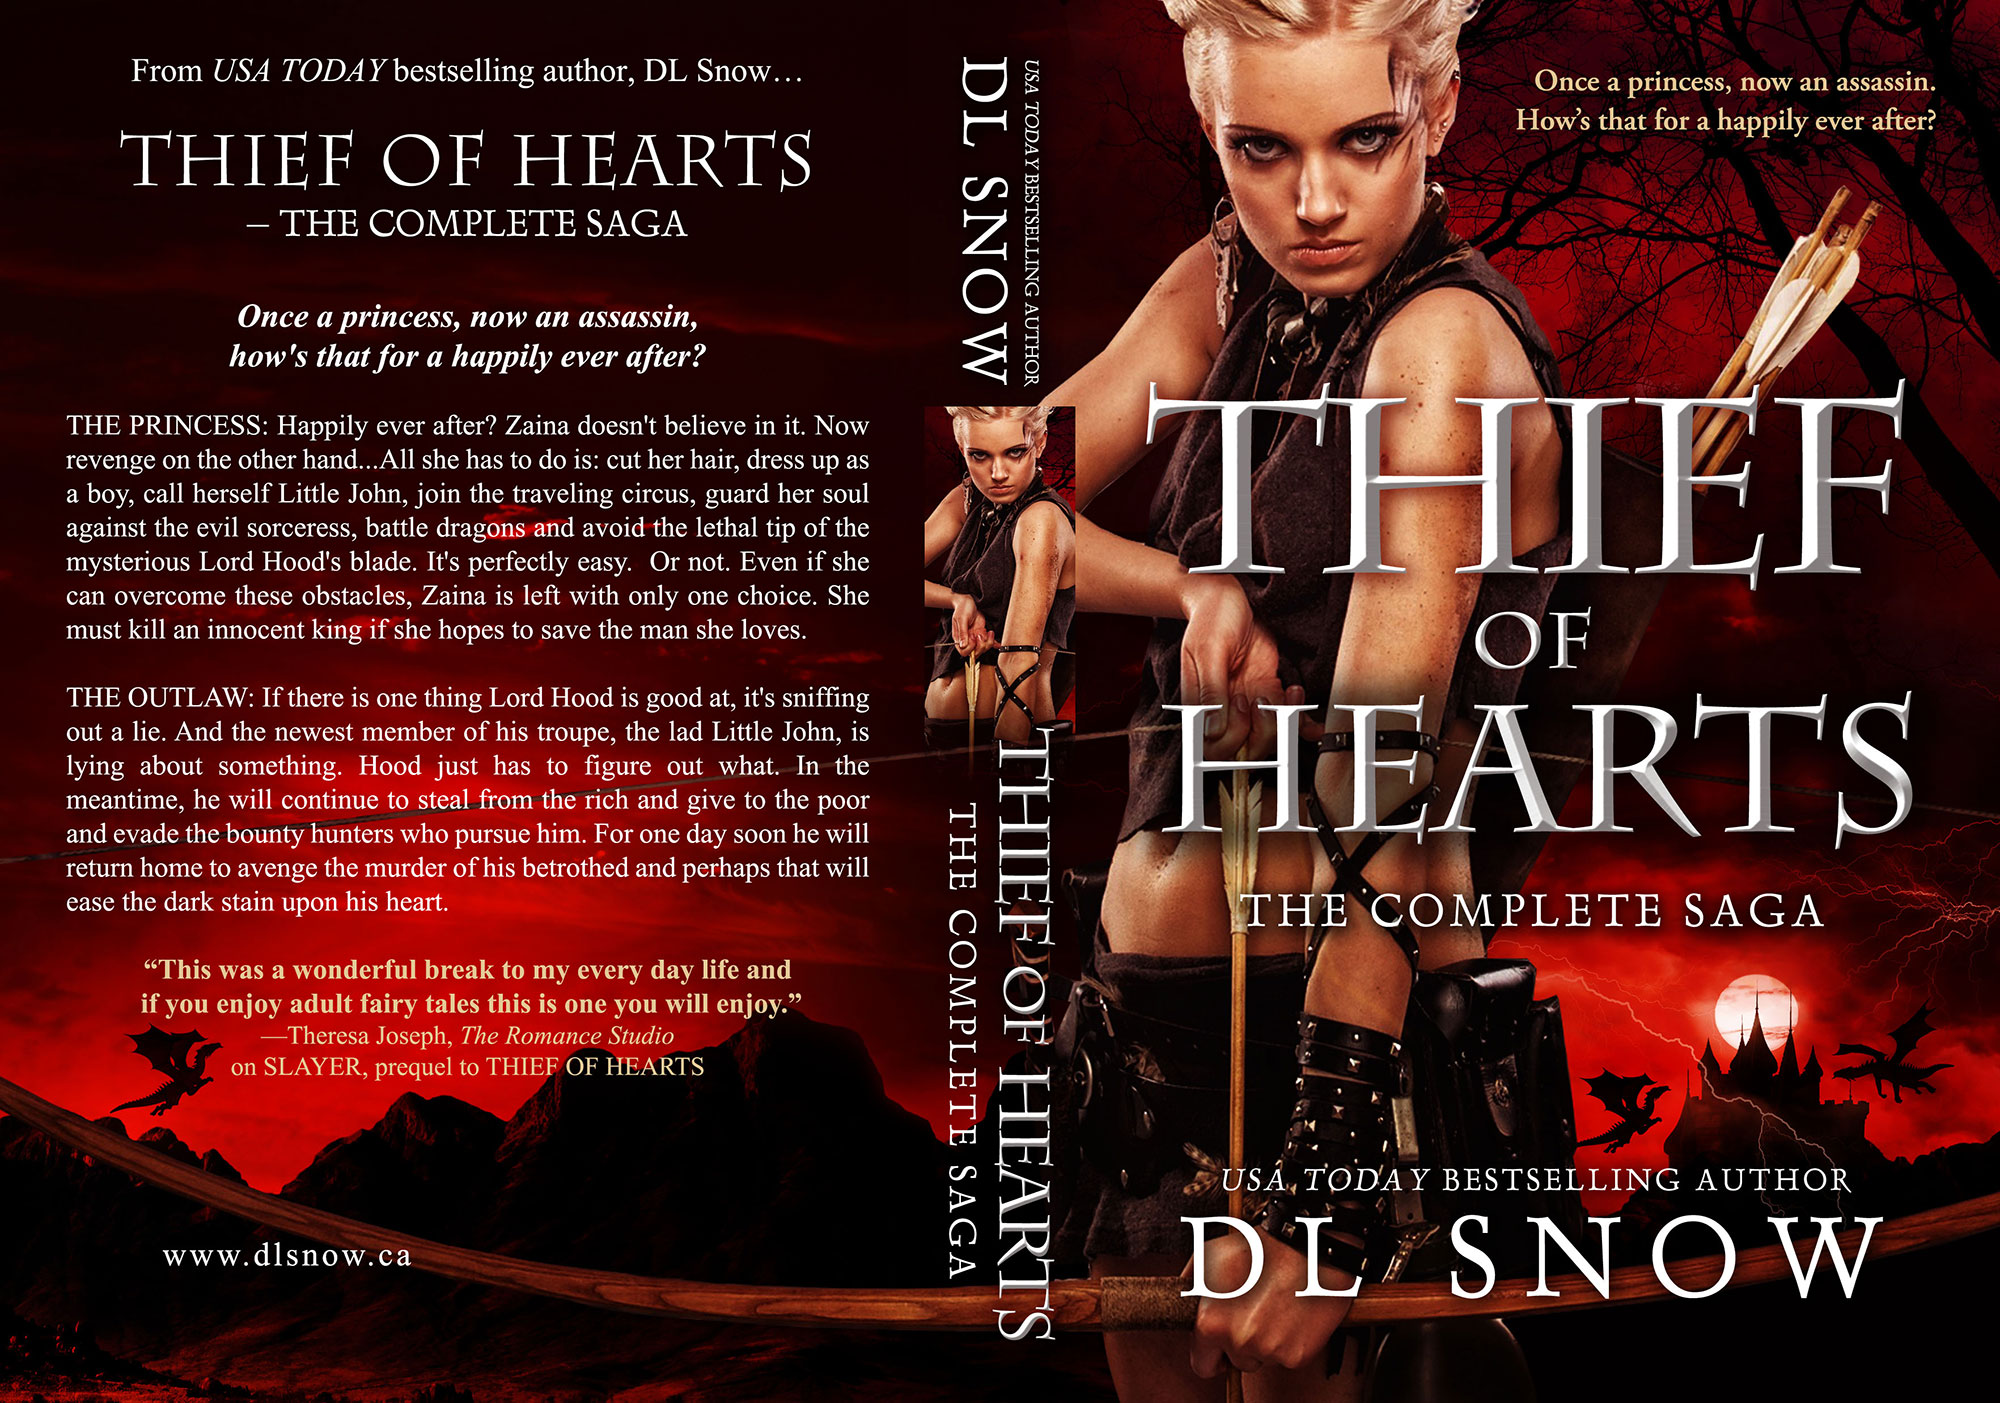 Thief of Hearts by DL Snow (Print Coverflat)